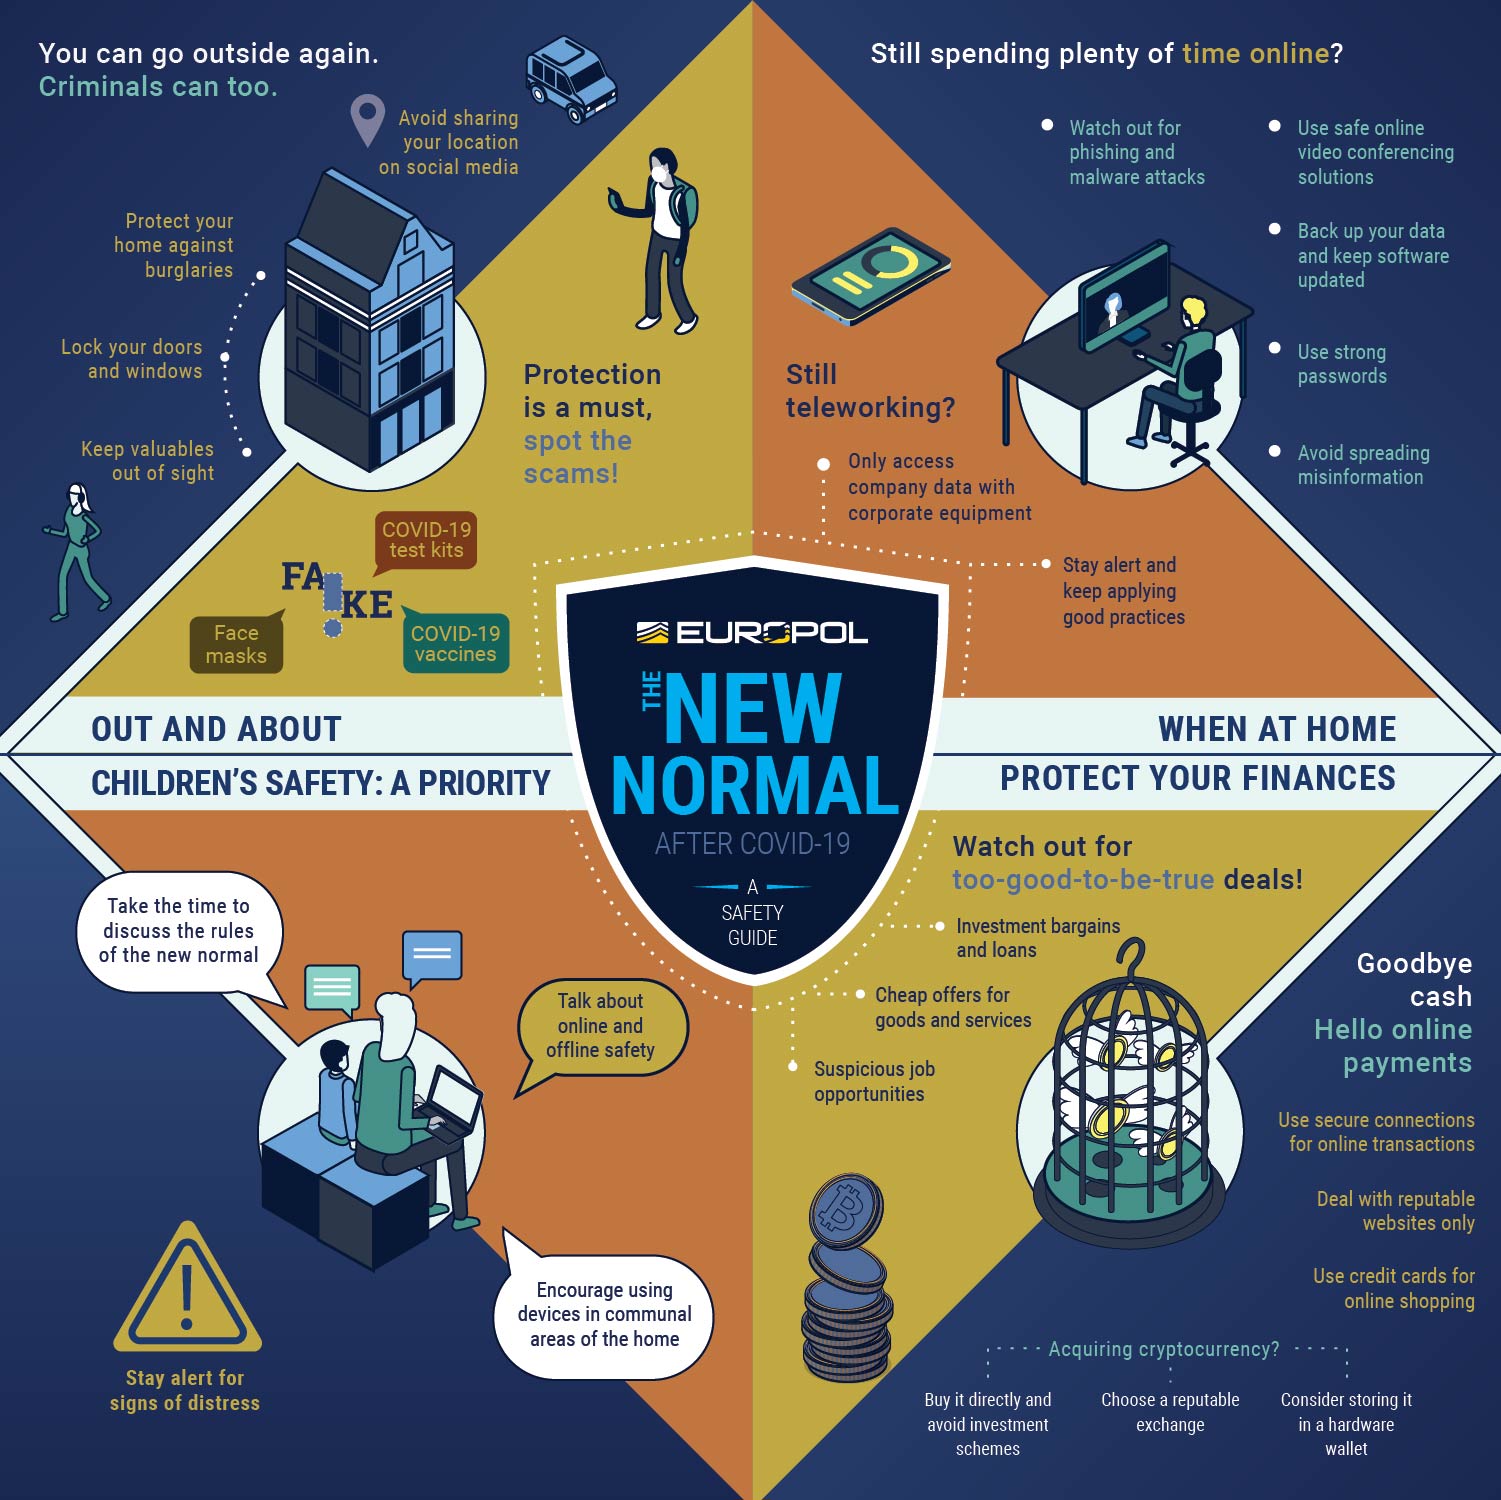 A safety guide for the ‘new normal’ after COVID19 Europol